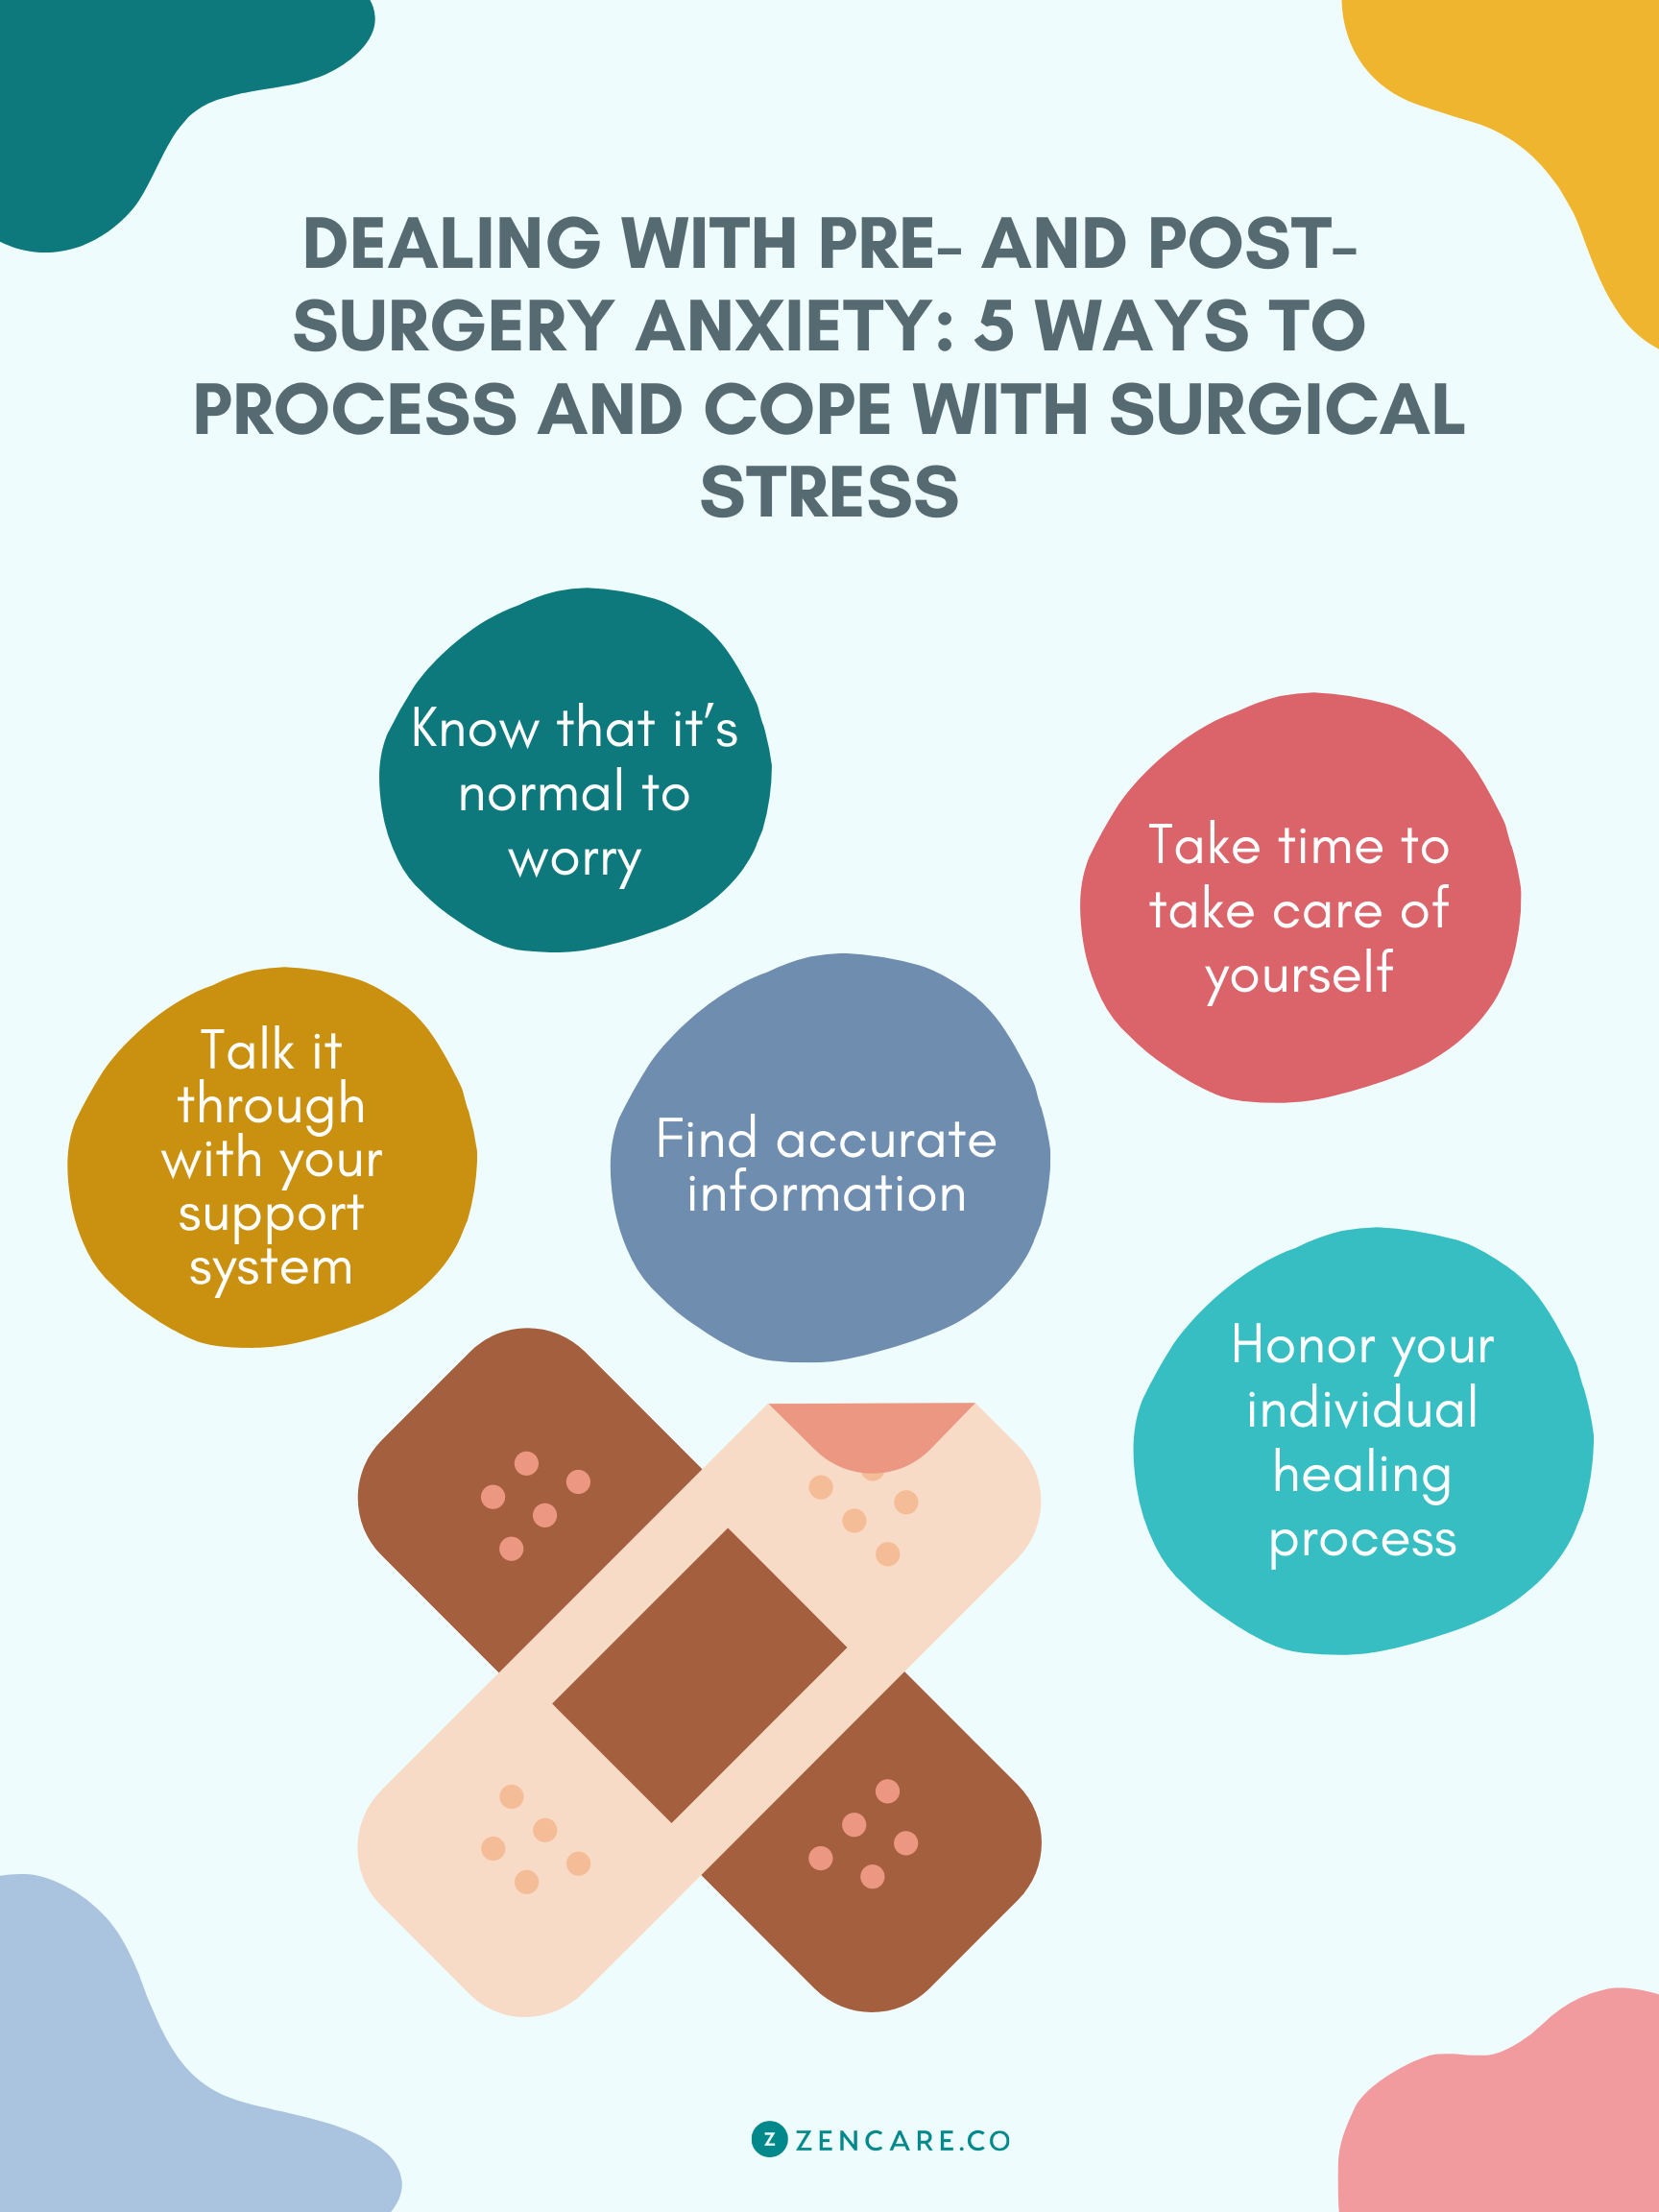 Dealing With Pre- & Post-Surgery Anxiety: Cope with Surgical Stress